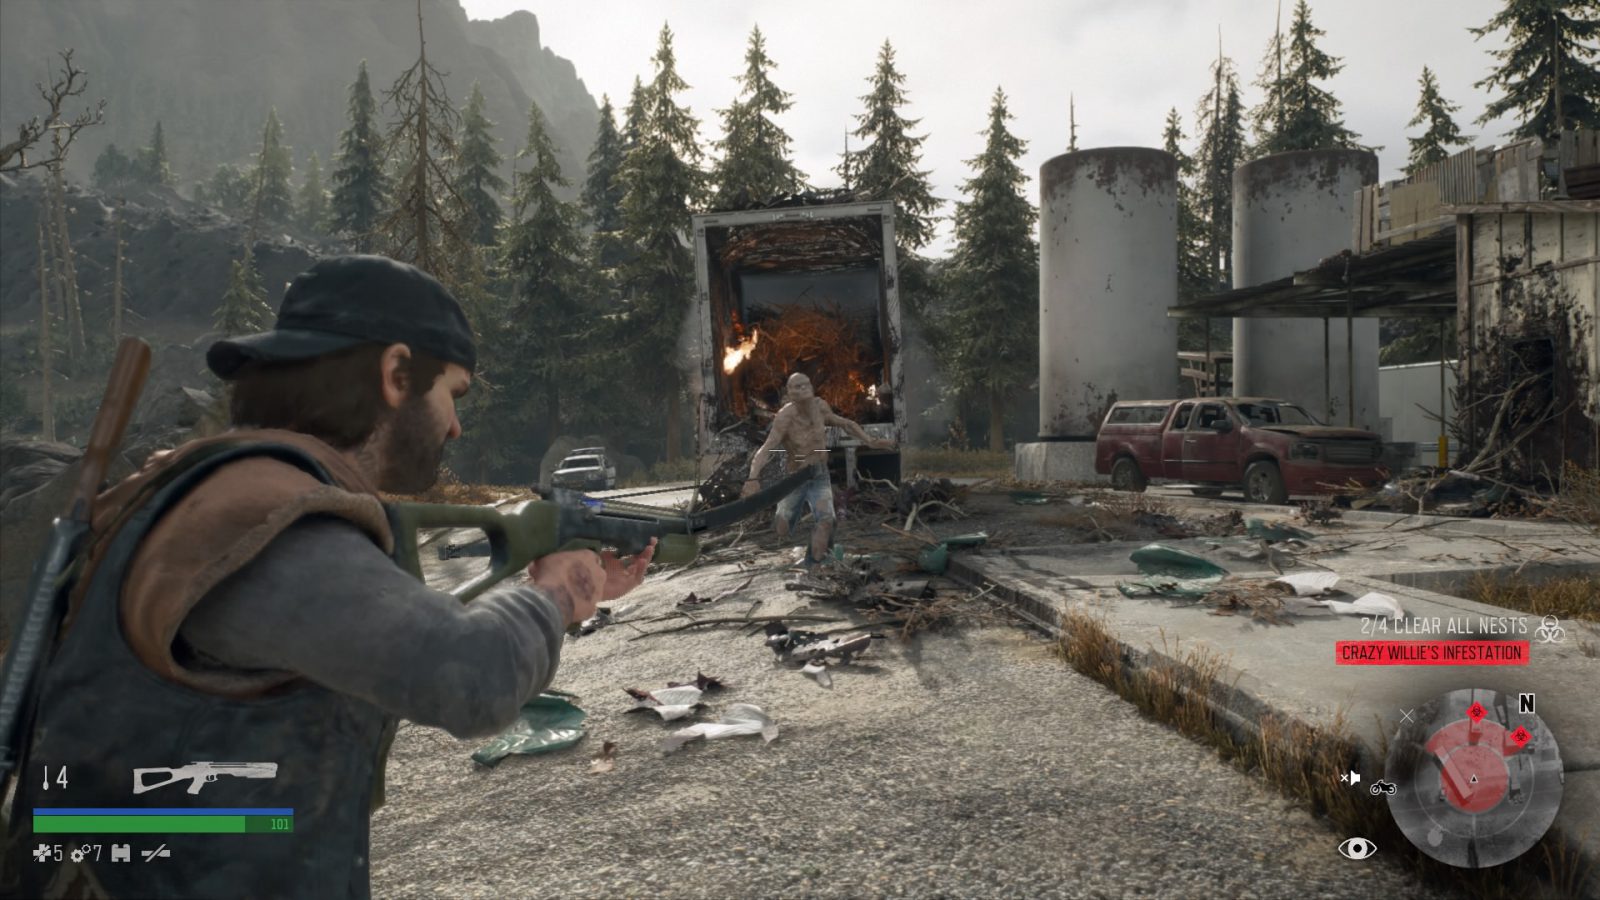 Days Gone Lead Designer Thanks Fans for Playing the Game No Matter How Much  Money They Spent